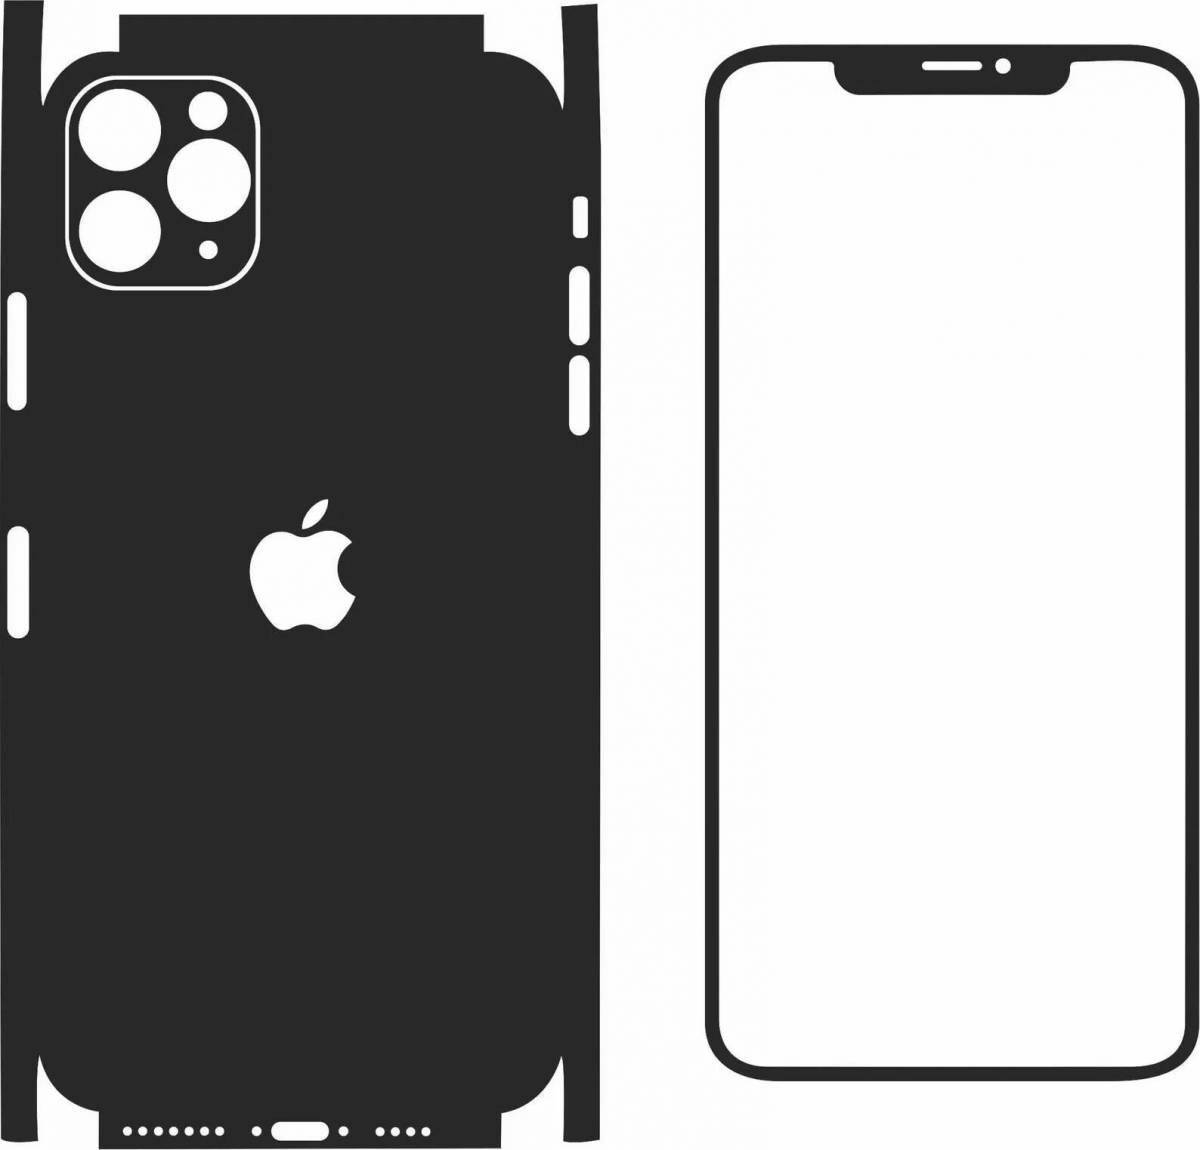 Awesome iphone x coloring page